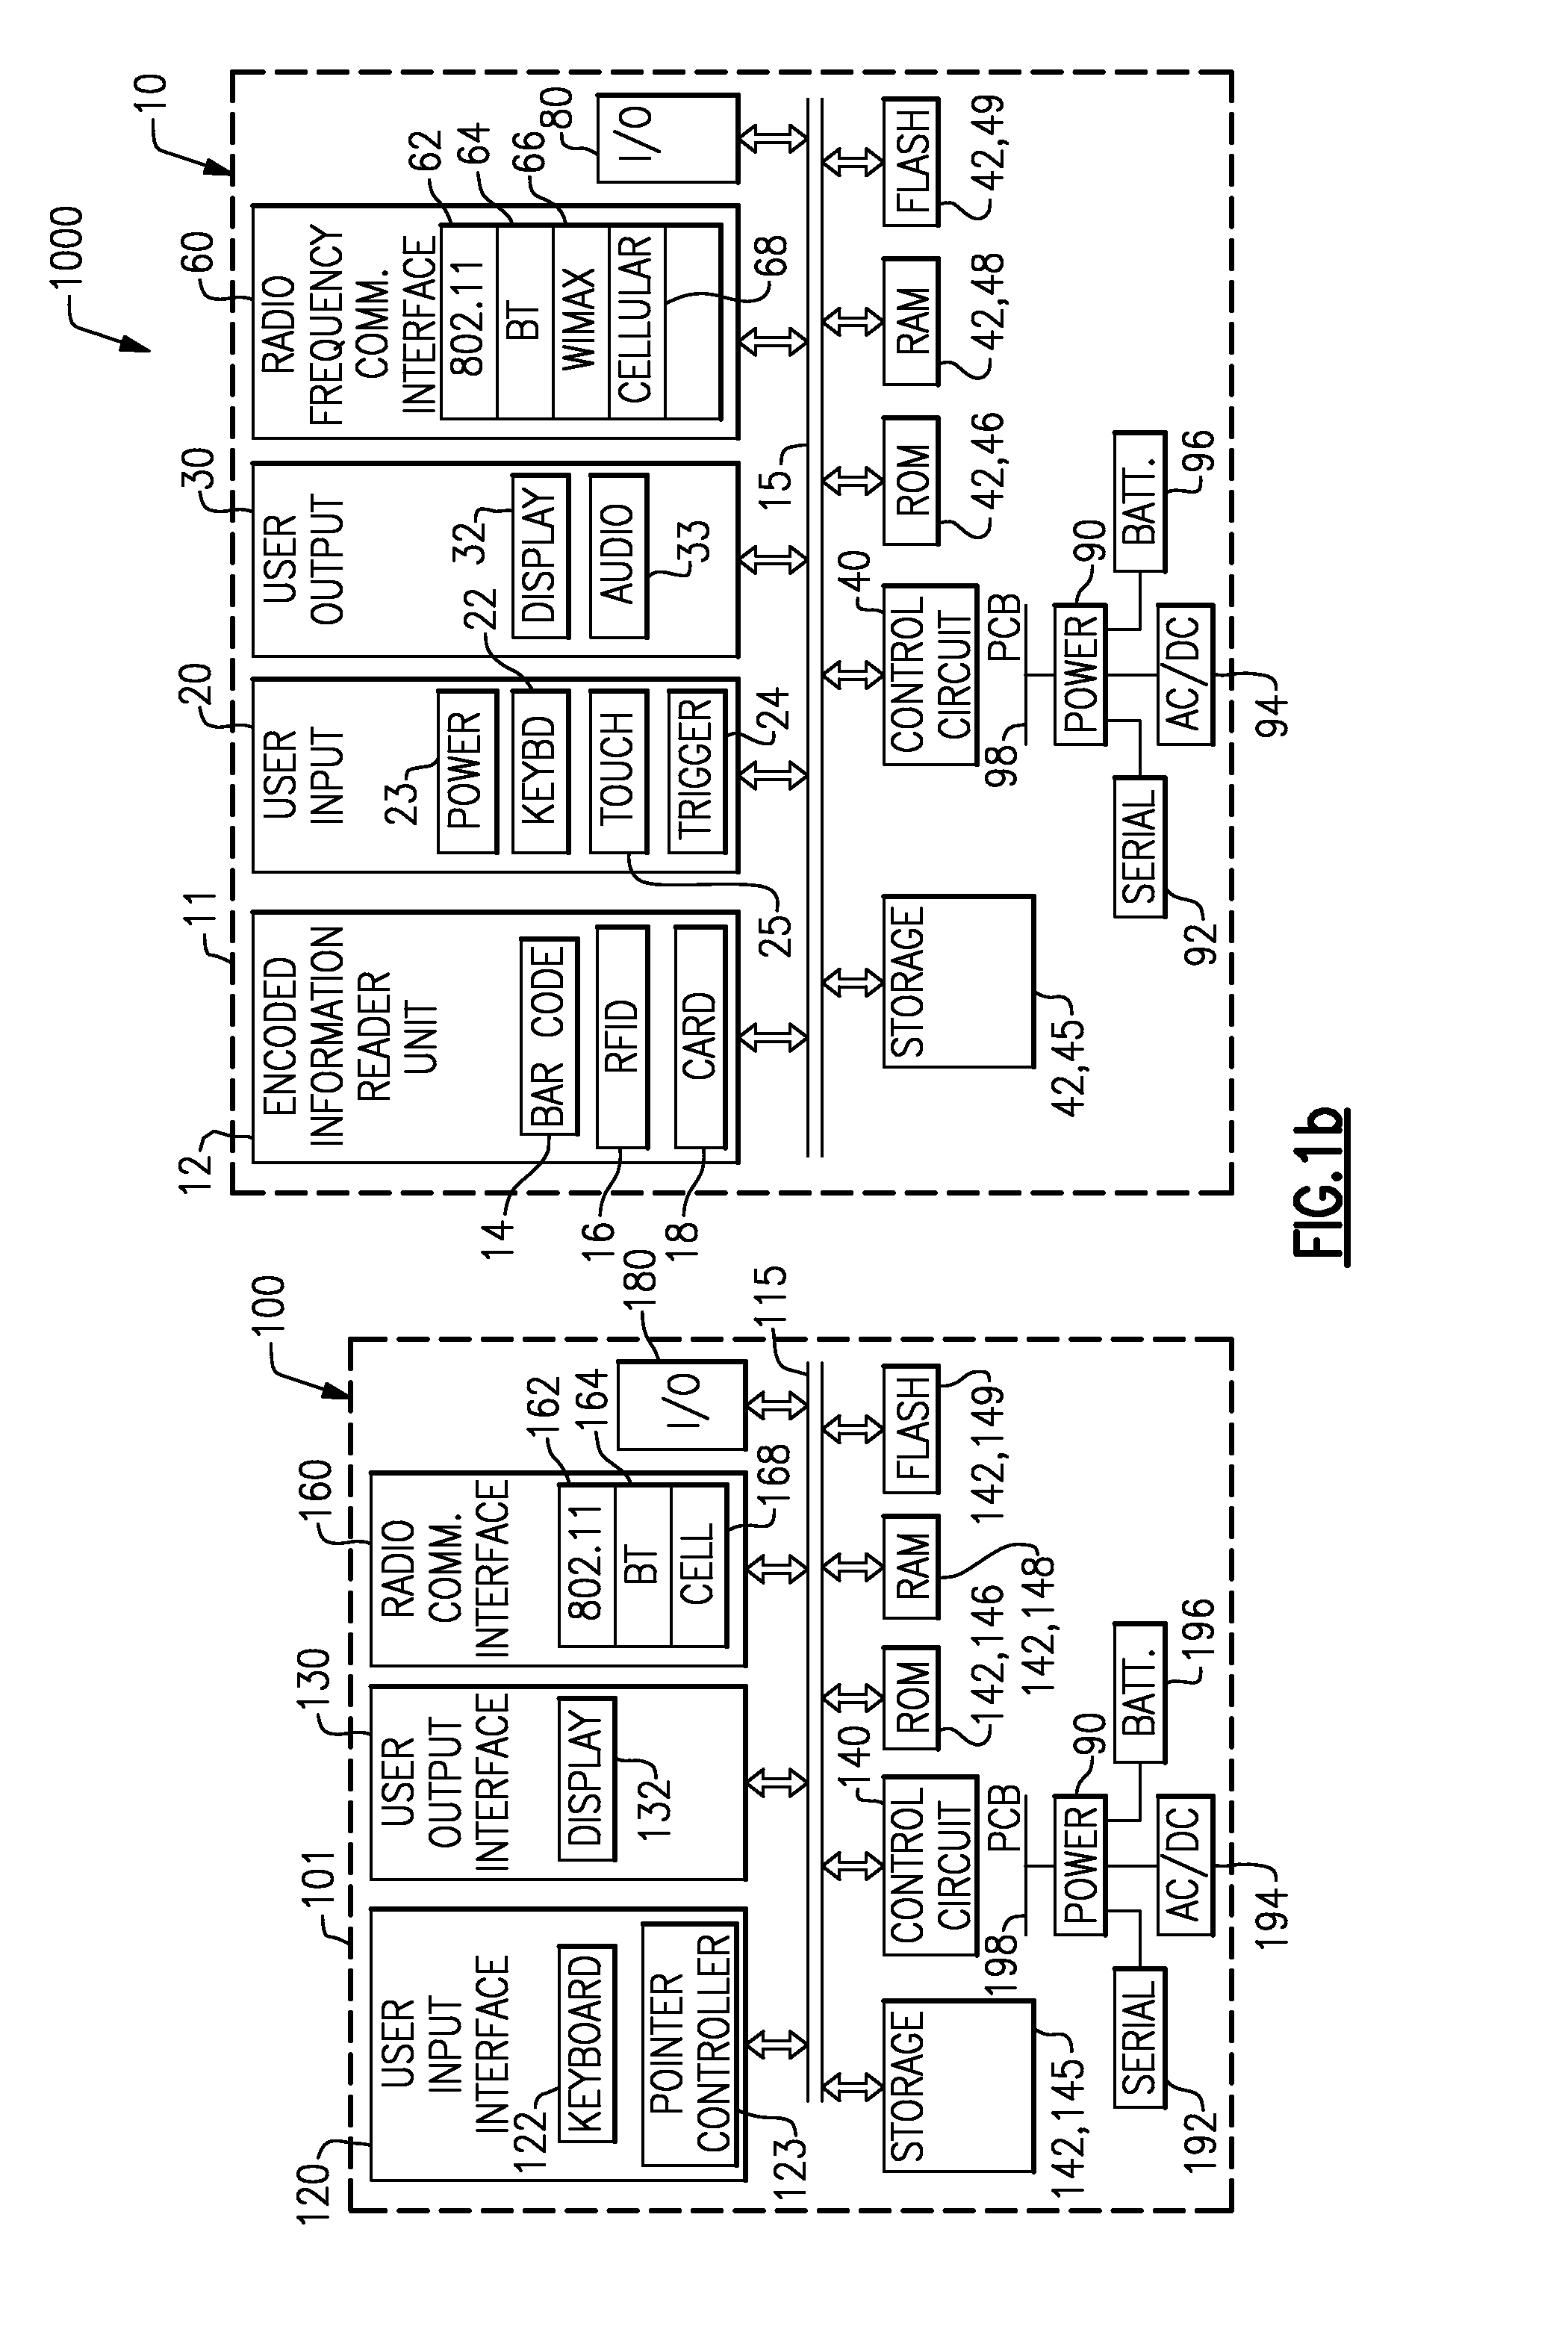 Data collection system having reconfigurable data collection terminal